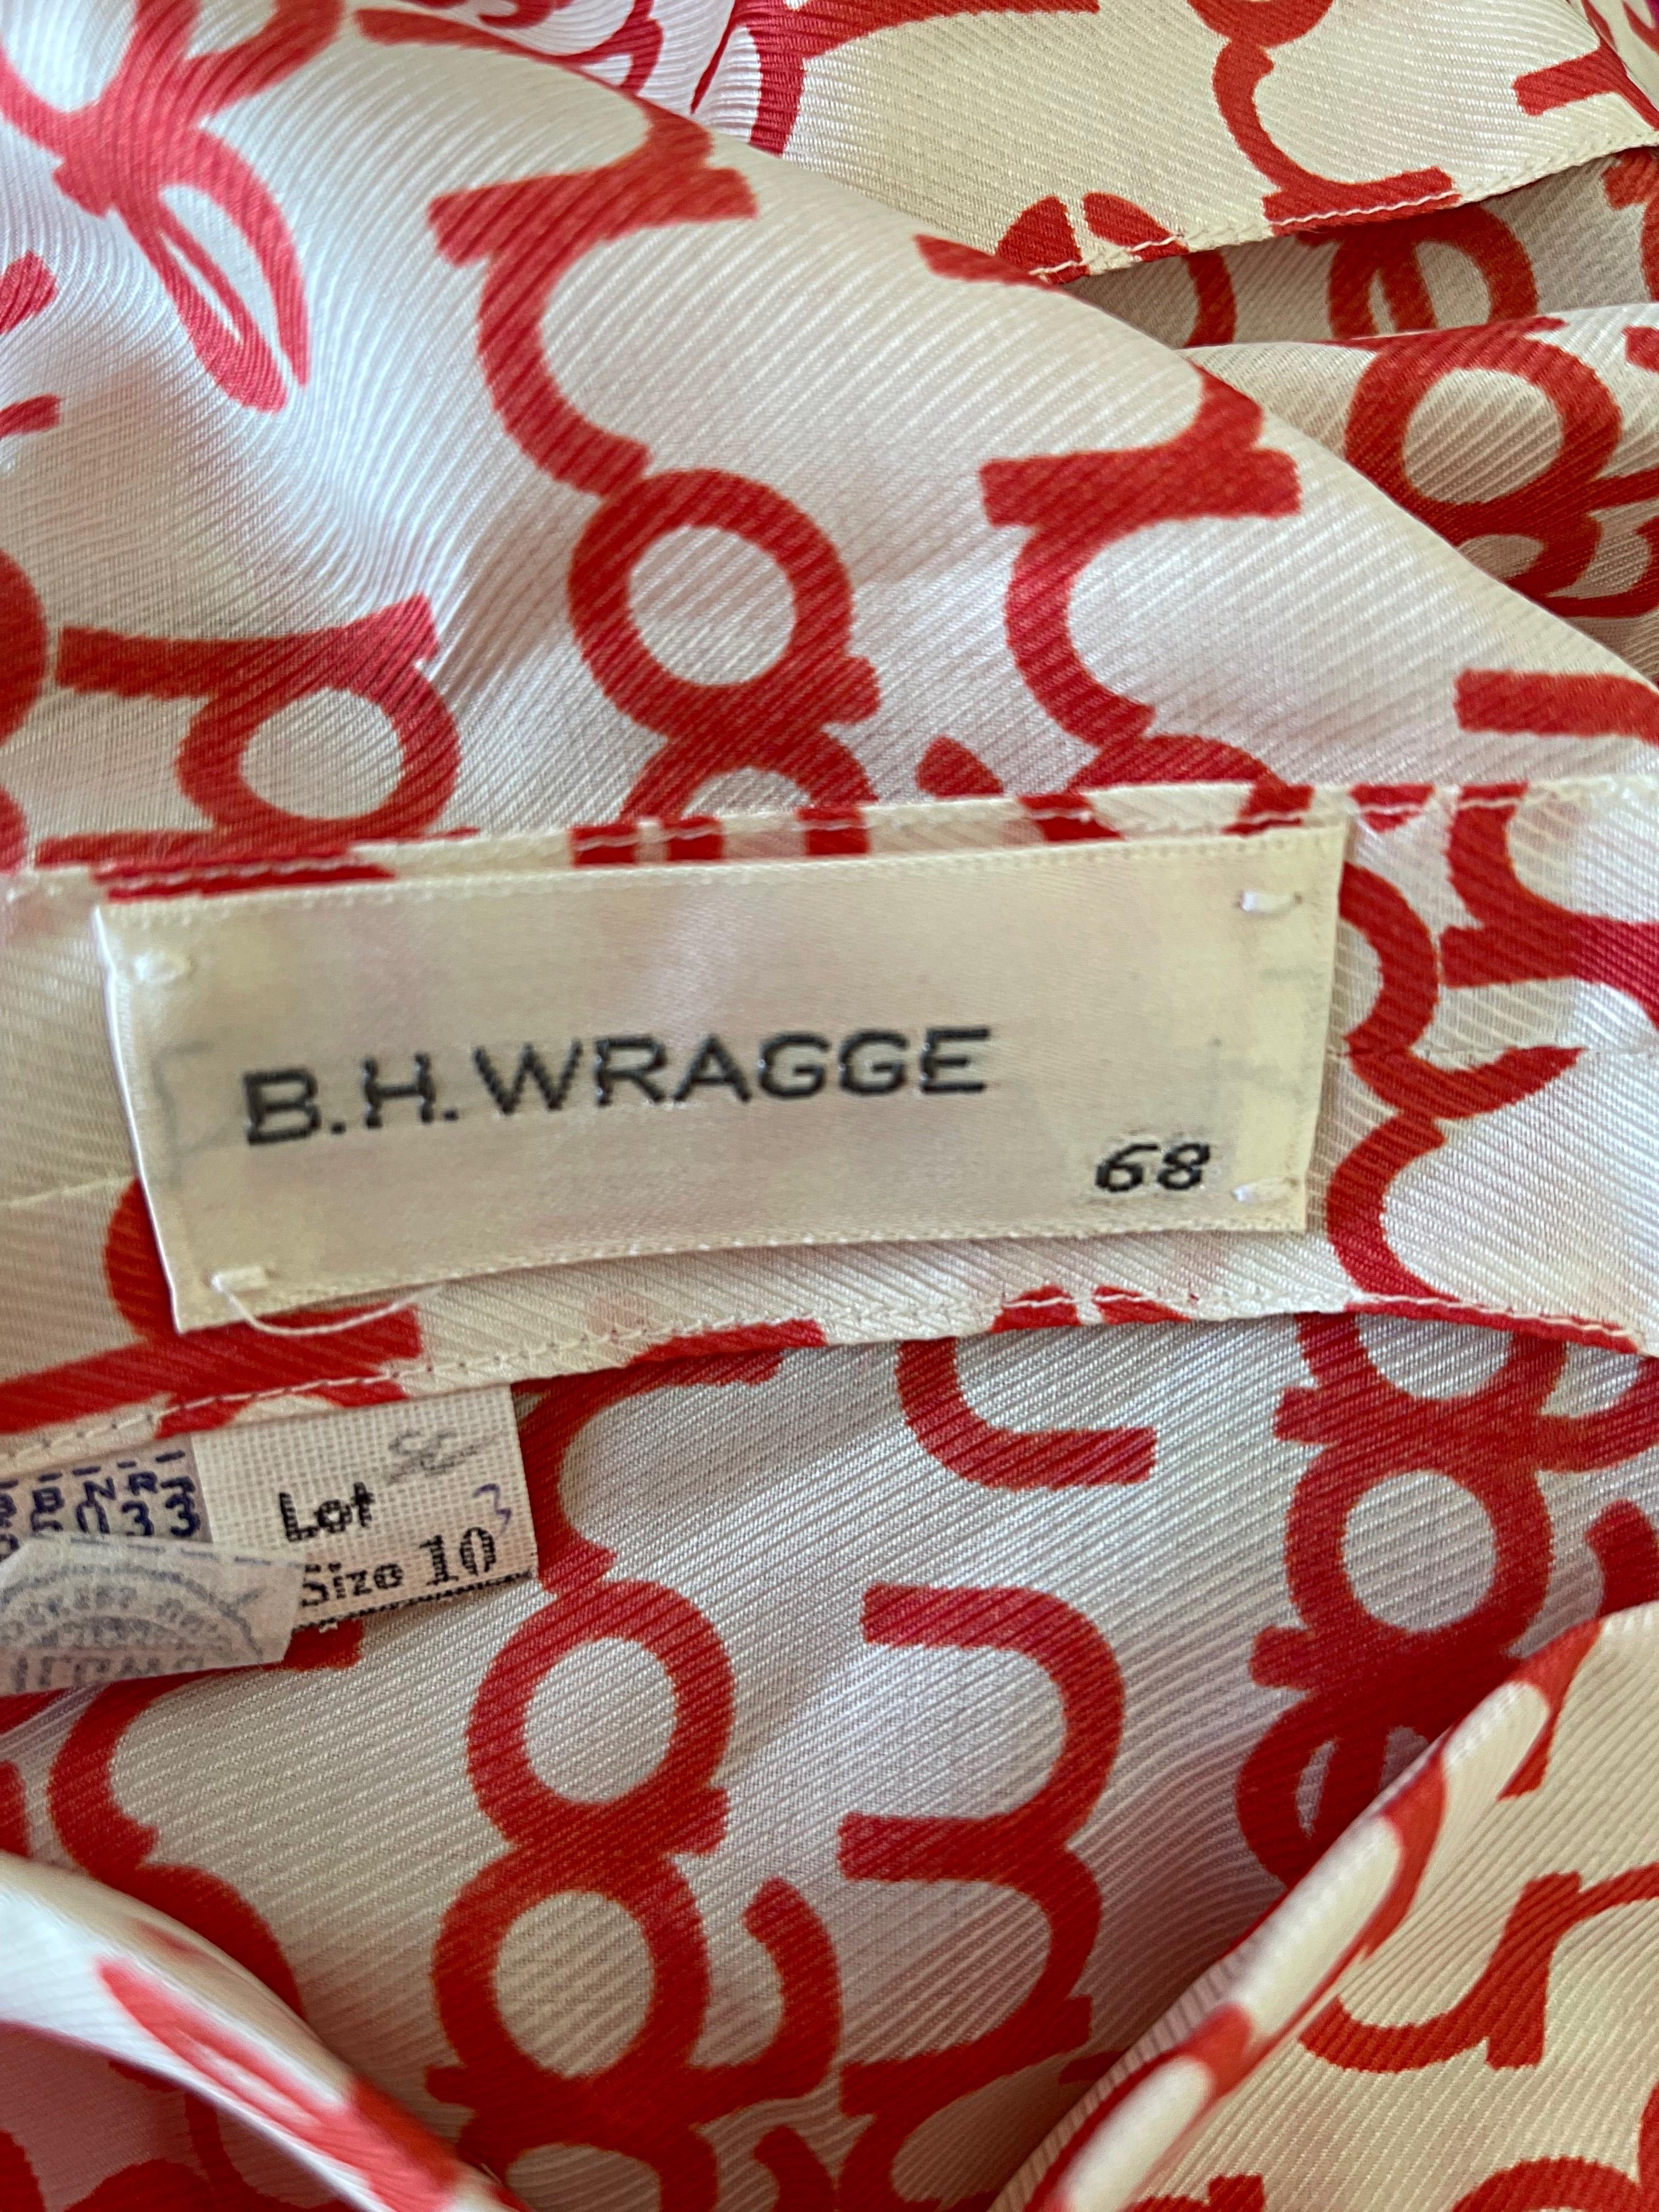 Chic deadstock ( new with original store tags attached ) BH WRAGGE red and white logo print silk long sleeve blouse top ! Features the brand’s signature logo throughout. Hidden button up the front. 
In perfect unworn condition
Made in